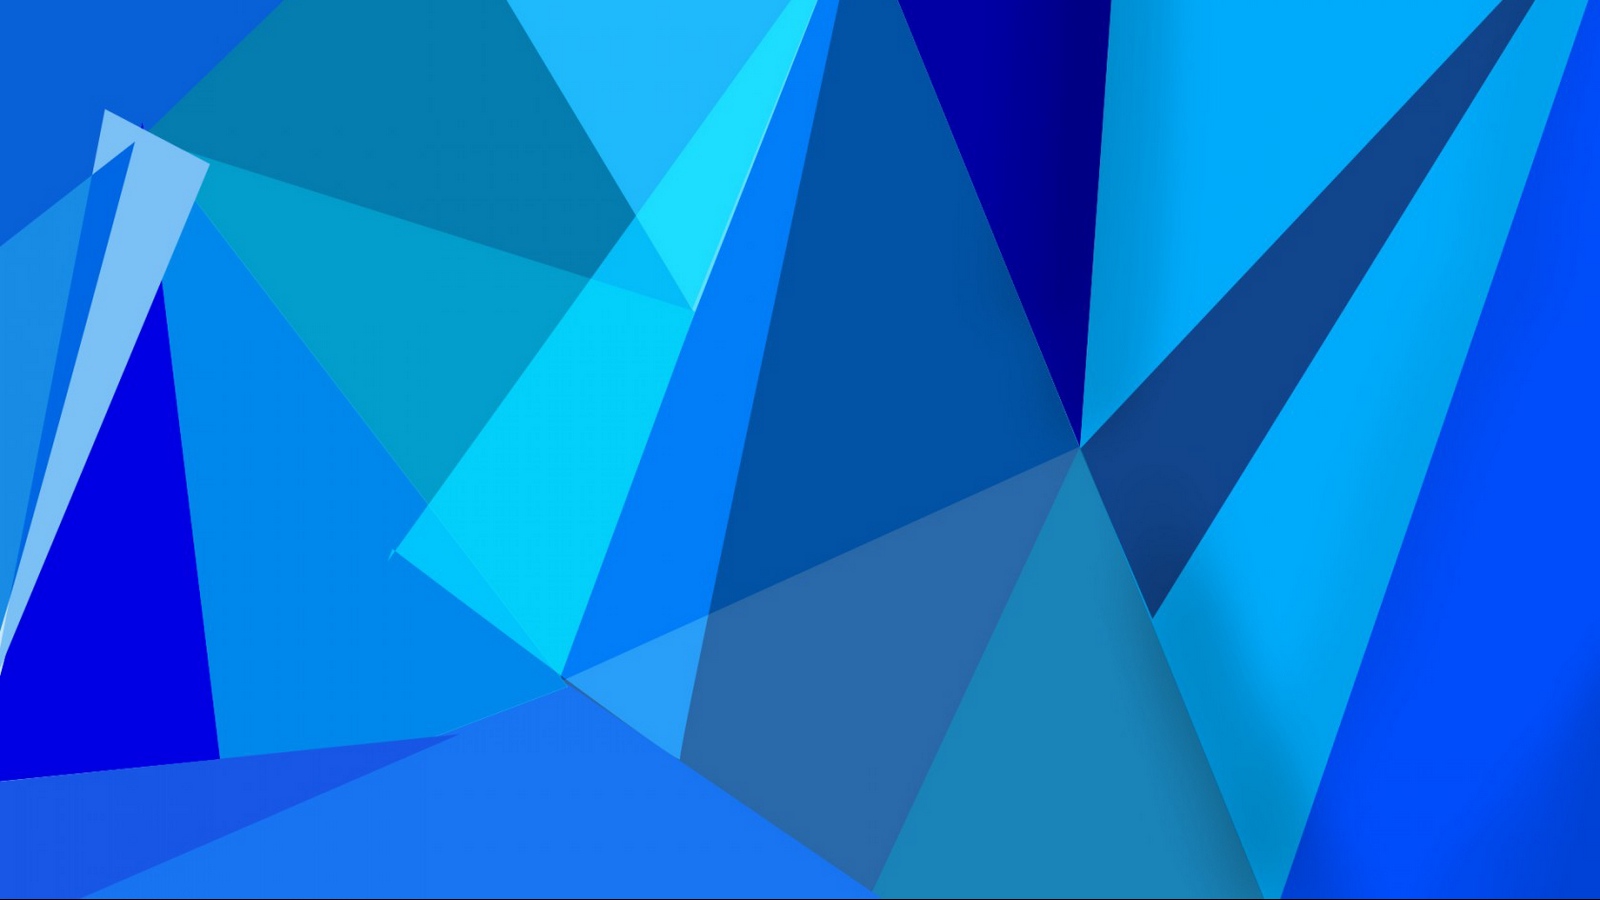 Wallpaper Forms, Shapes, Blue, Cyan - Shapes Blue , HD Wallpaper & Backgrounds